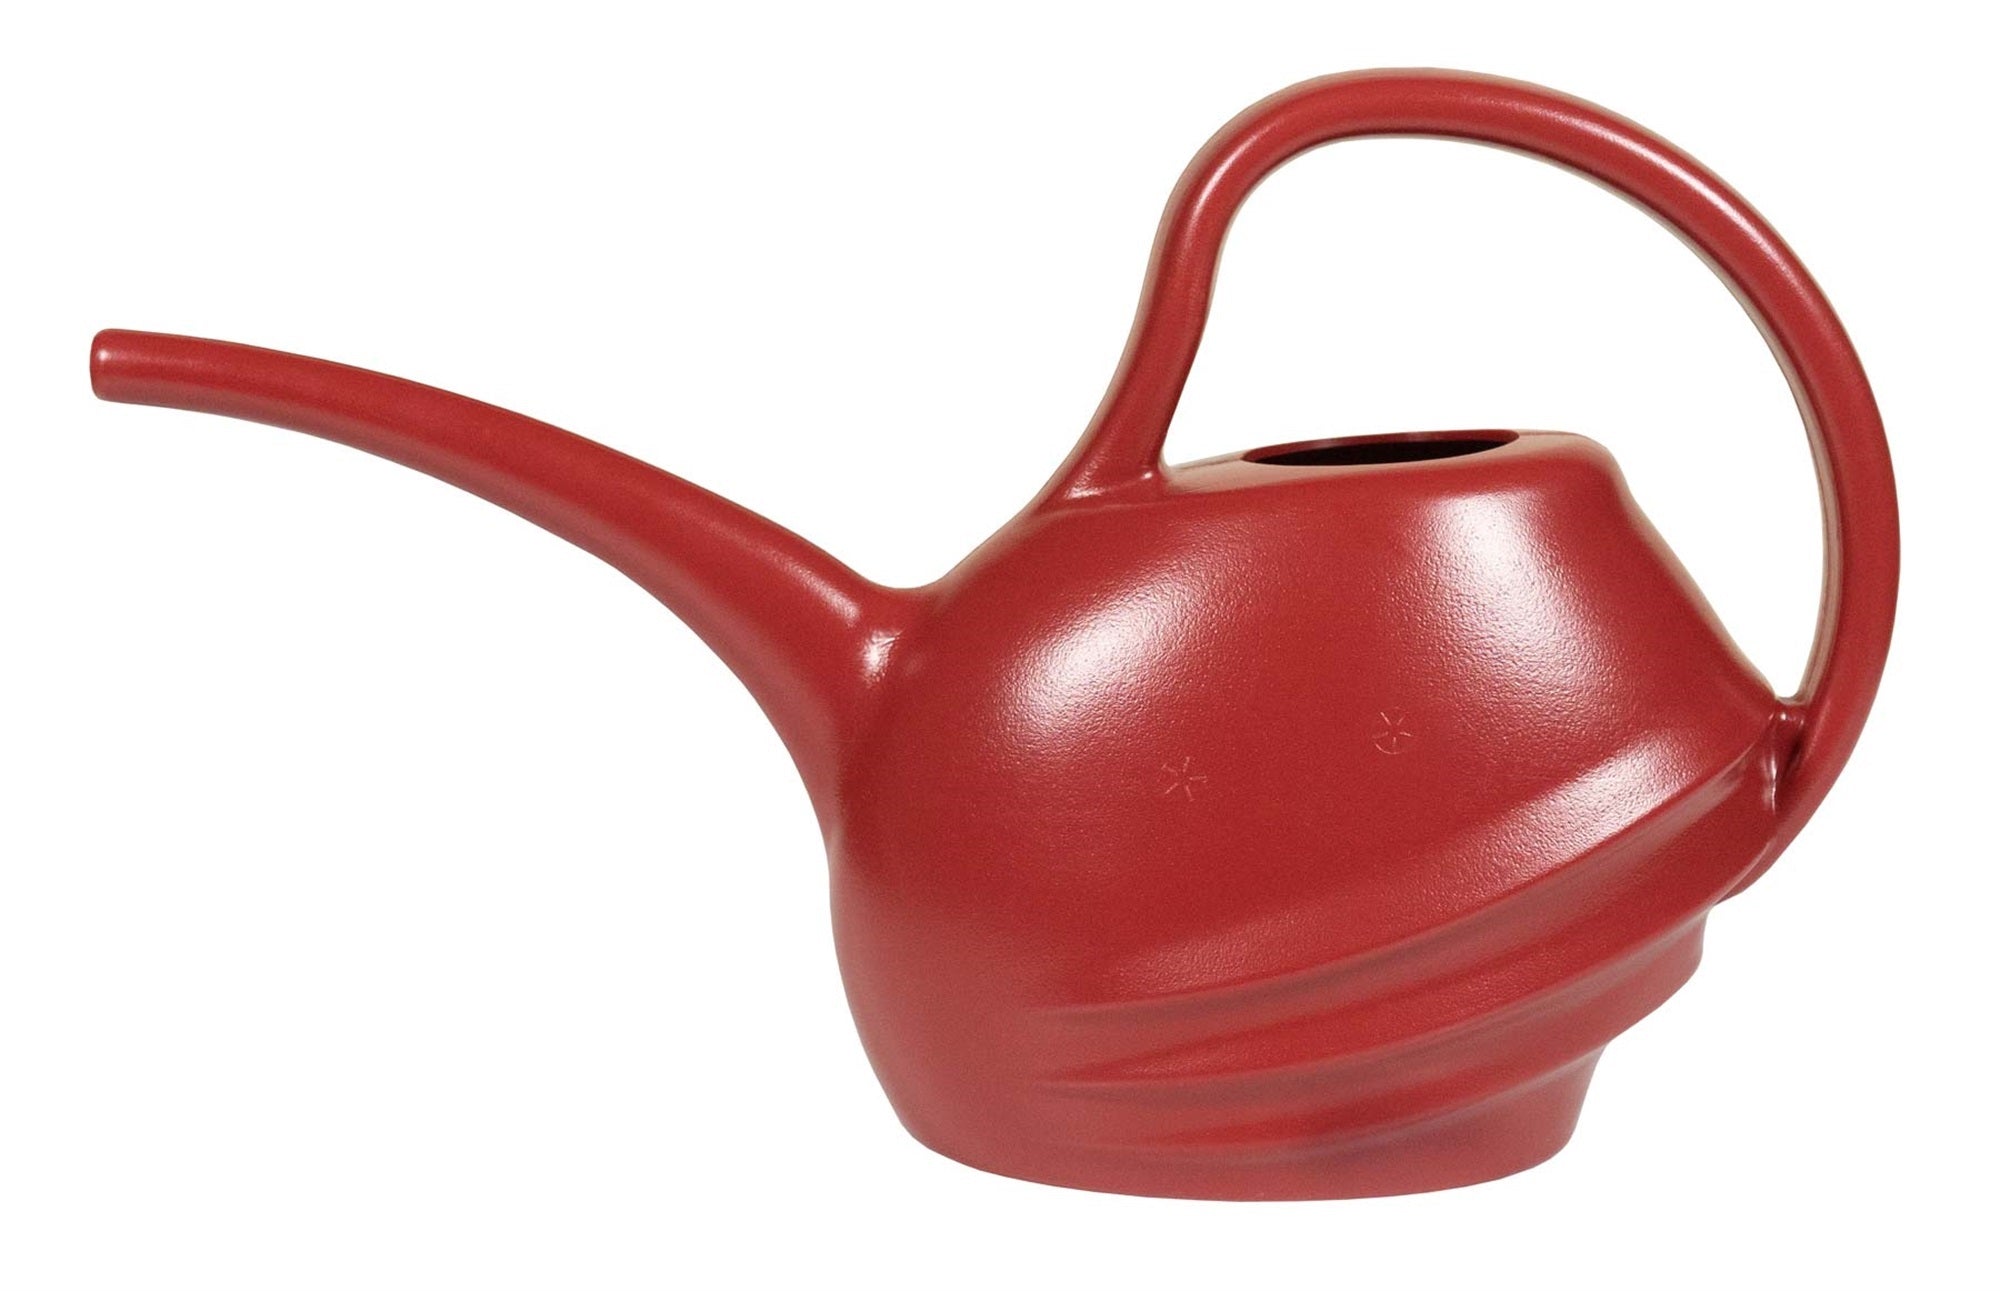 Bloem Lightweight Plastic Watering Cans with Long Spout, 0.5 Gallons